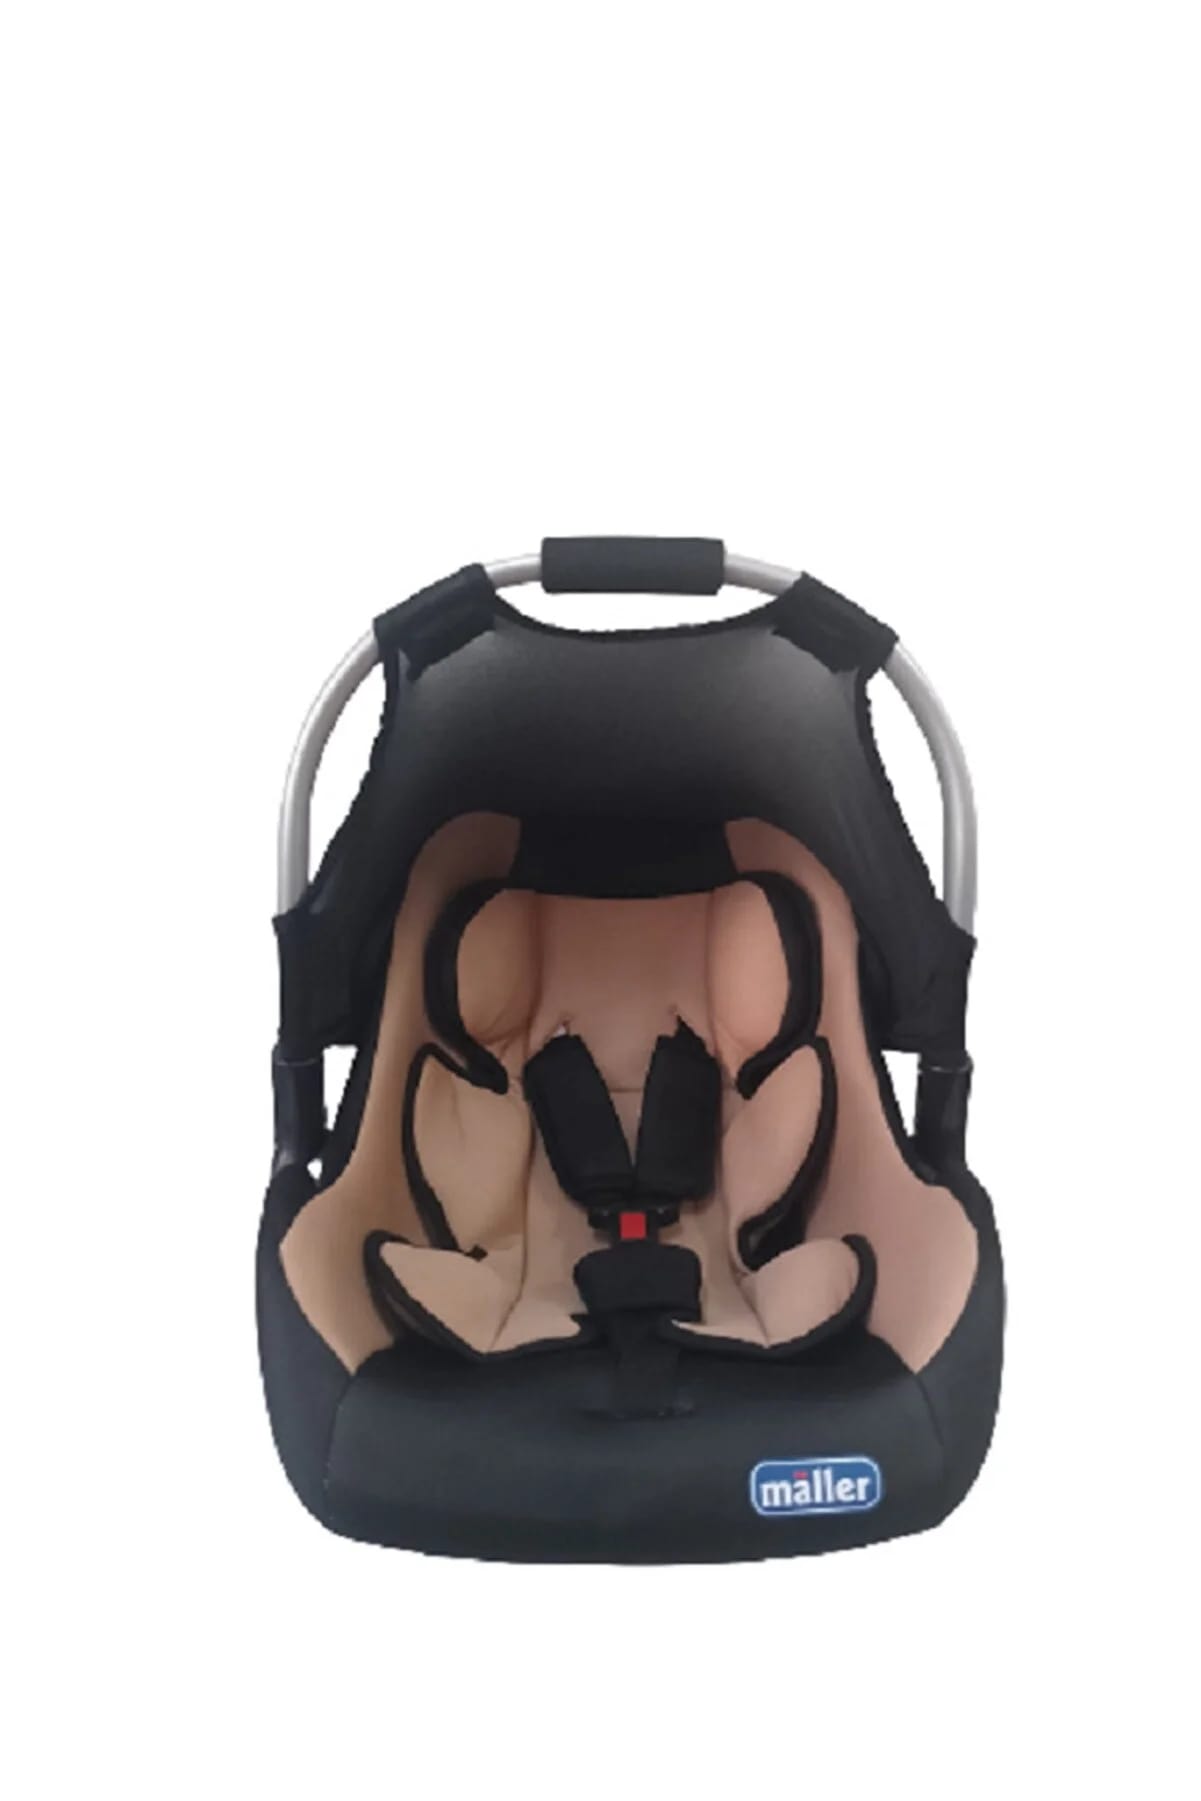 Maller Pedro Carry Chair and Carrier Brown and black